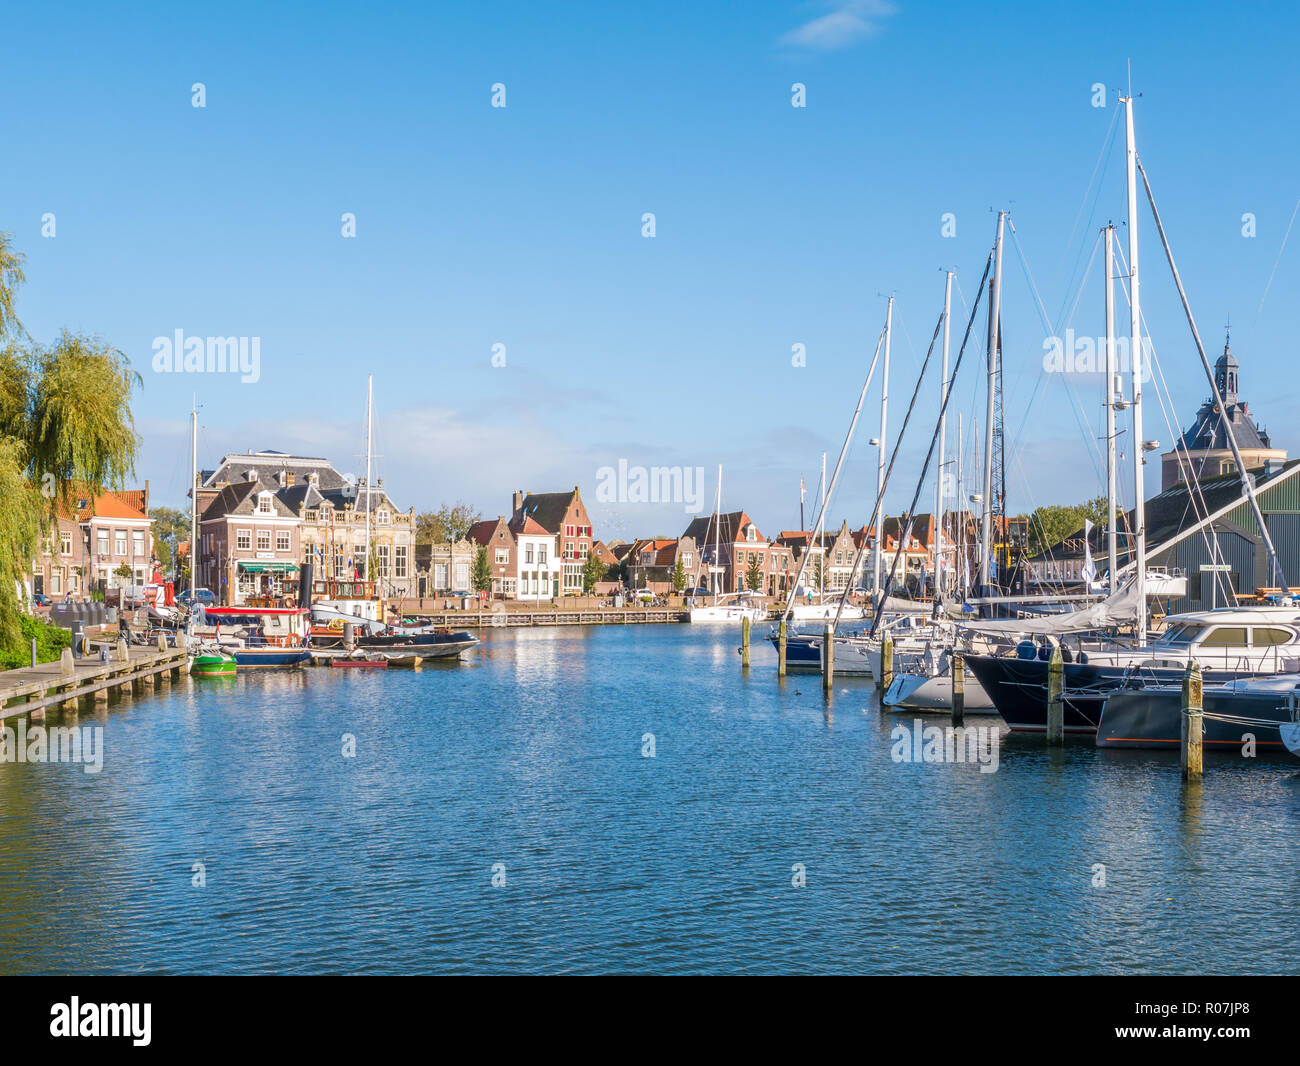 Boats in old harbour of city of Enkhuizen, North Holland, Netherlands Stock Photo